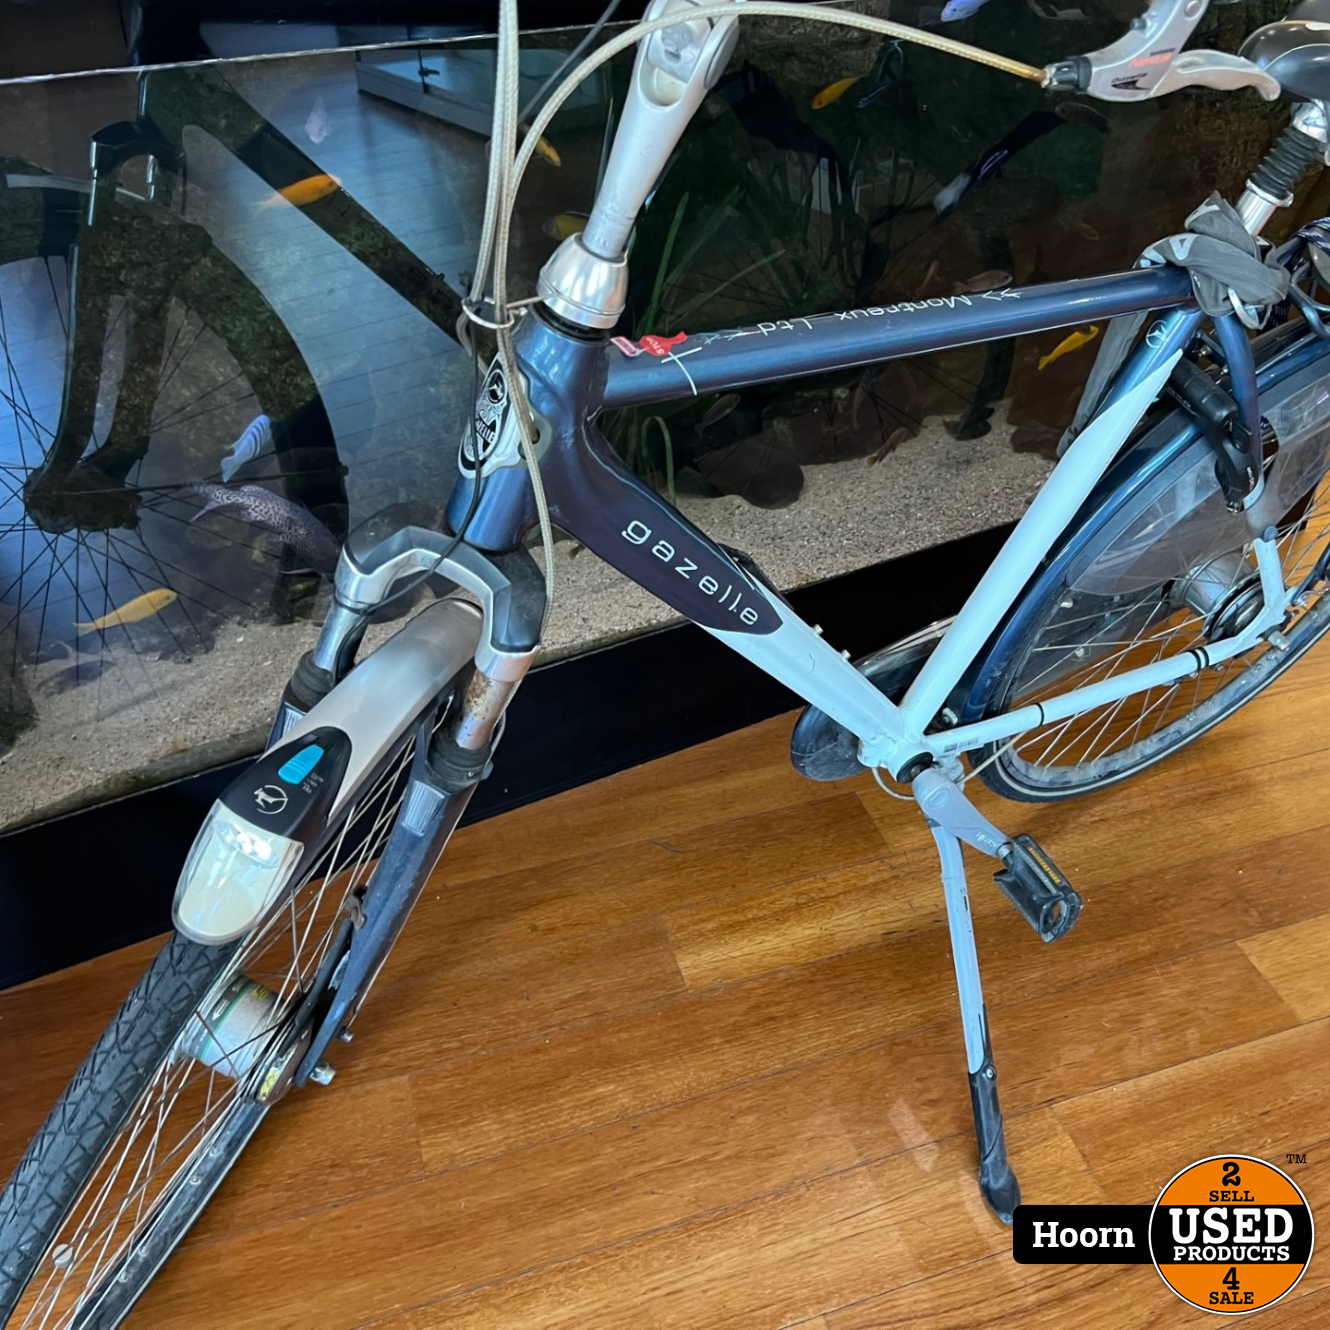 Montreux LTD N8 Herenfiets FM:57 - Used Products